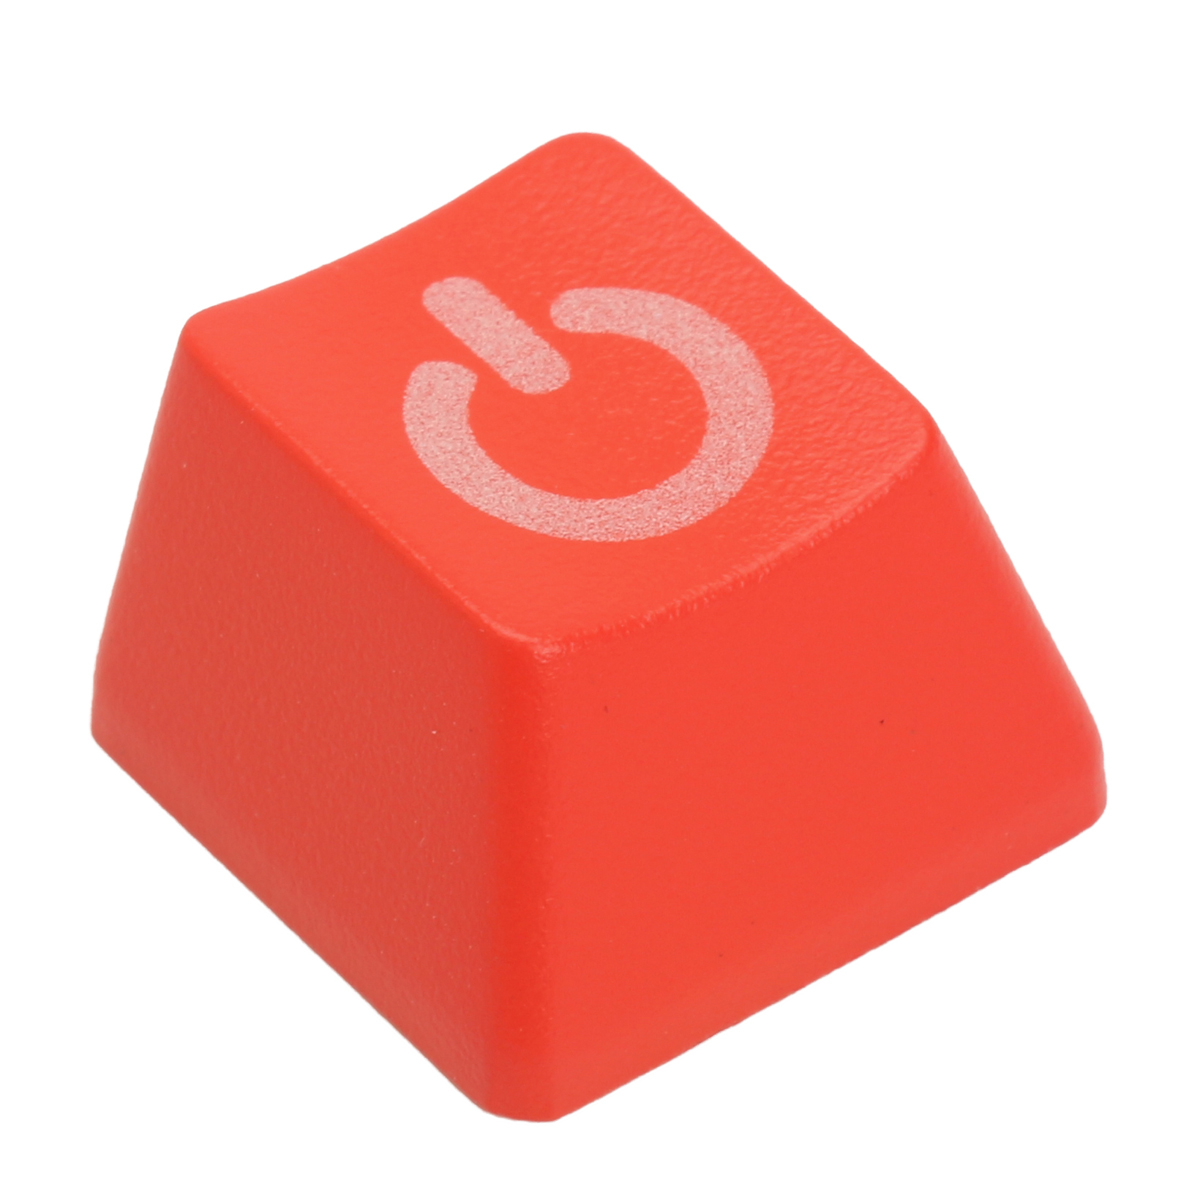 

Red Power ESC R4 ABS Translucent Backlit Keycap Key Caps for Mechanical Gaming Keyboard